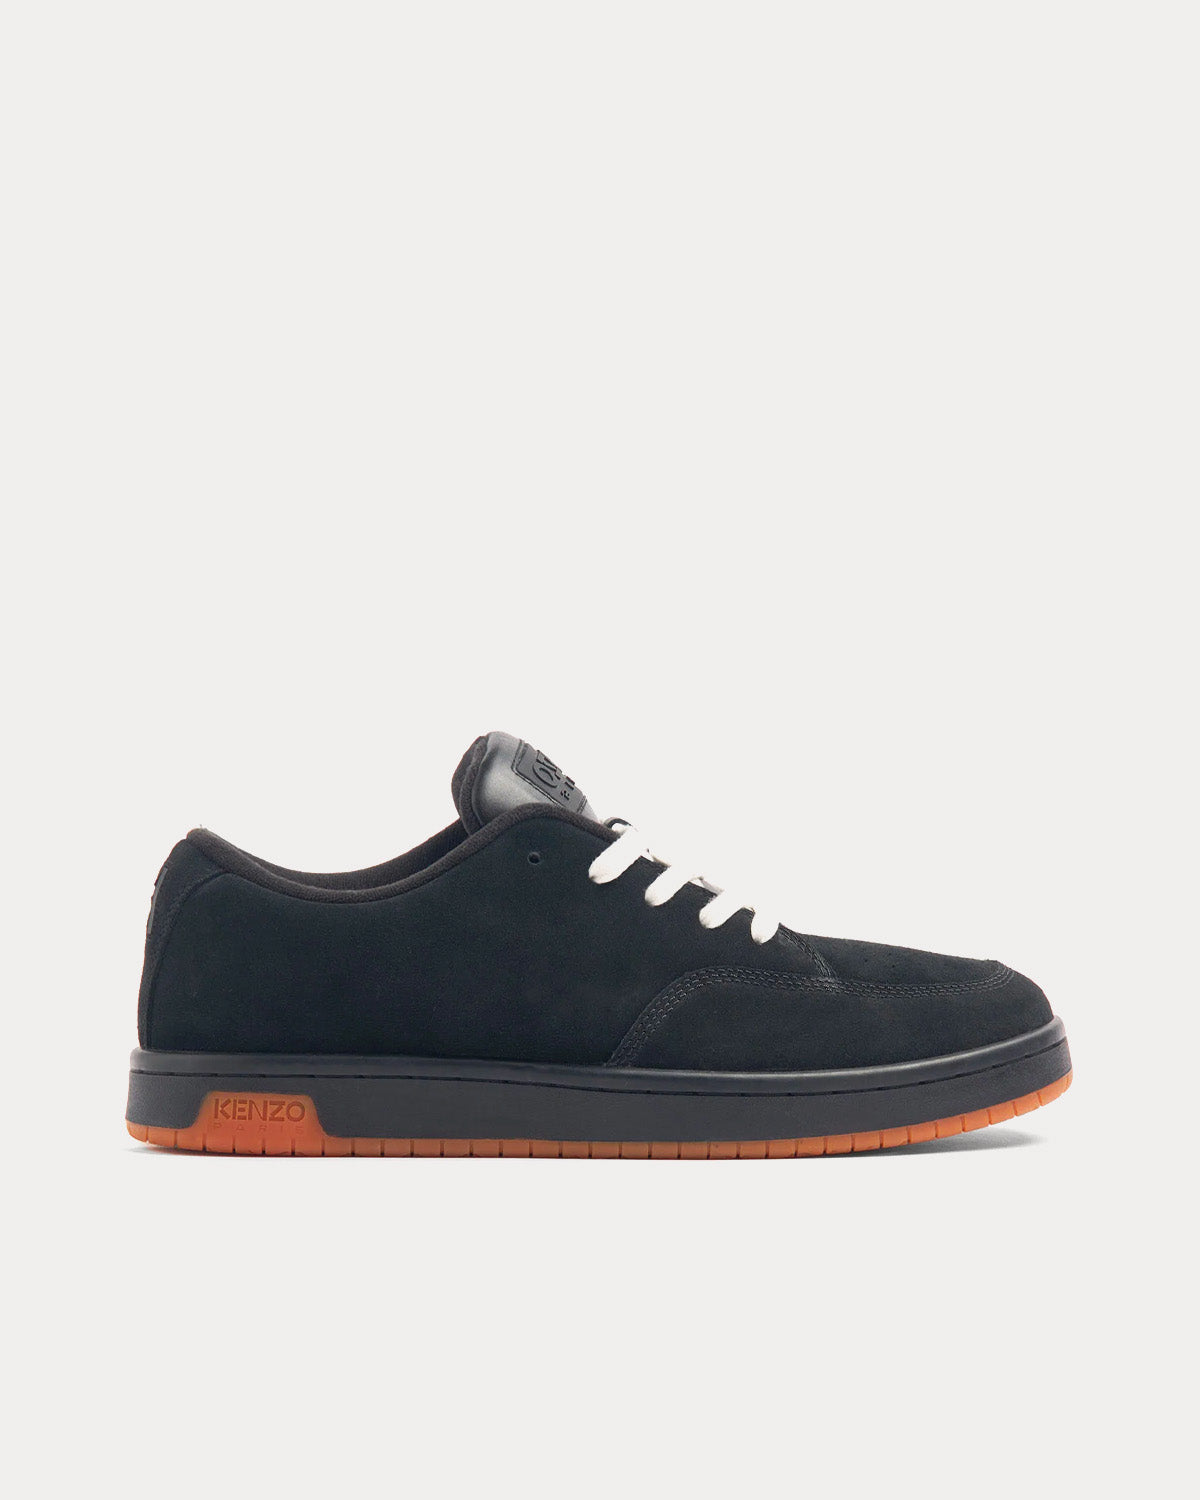 Kenzo - Dome Suede Black Low Top Sneakers